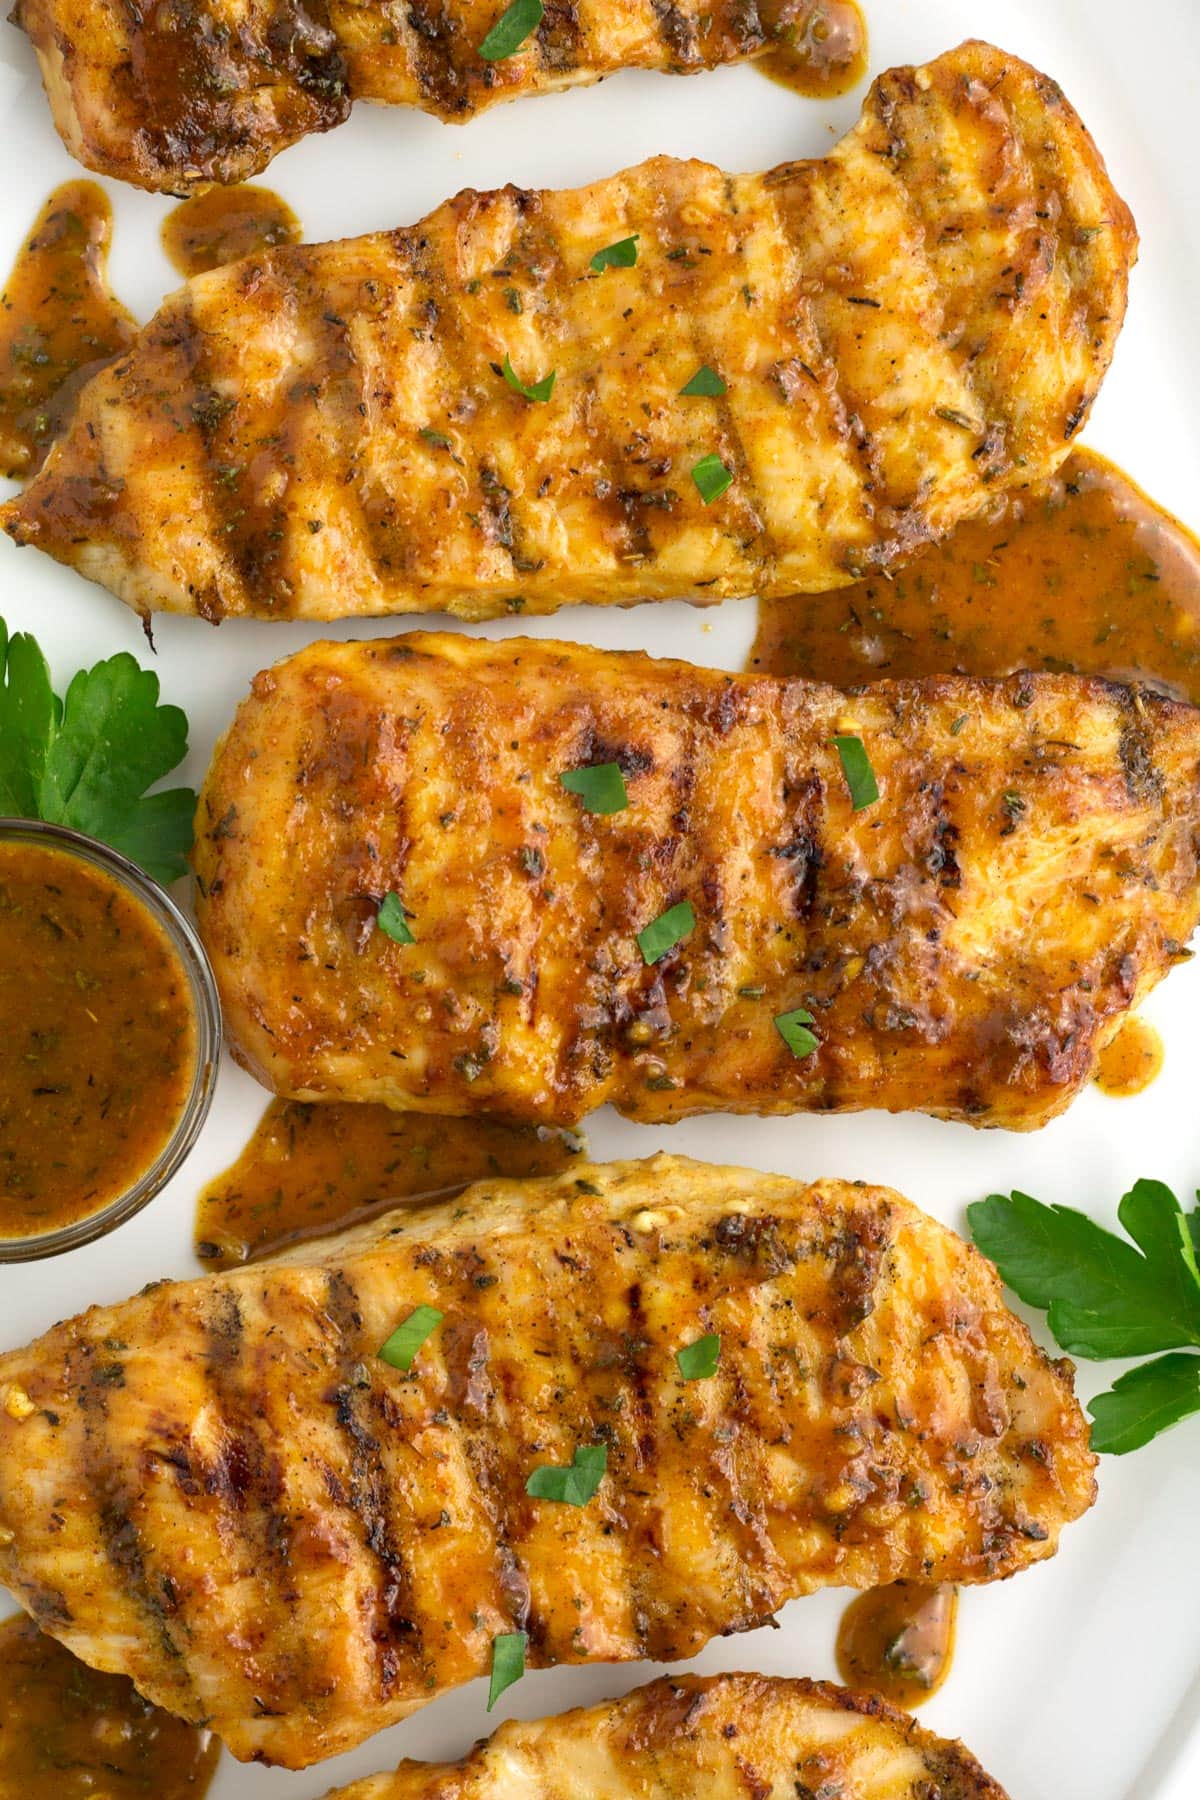 Overhead of three grilled chicken breasts with extra honey mustard sauce on the side.